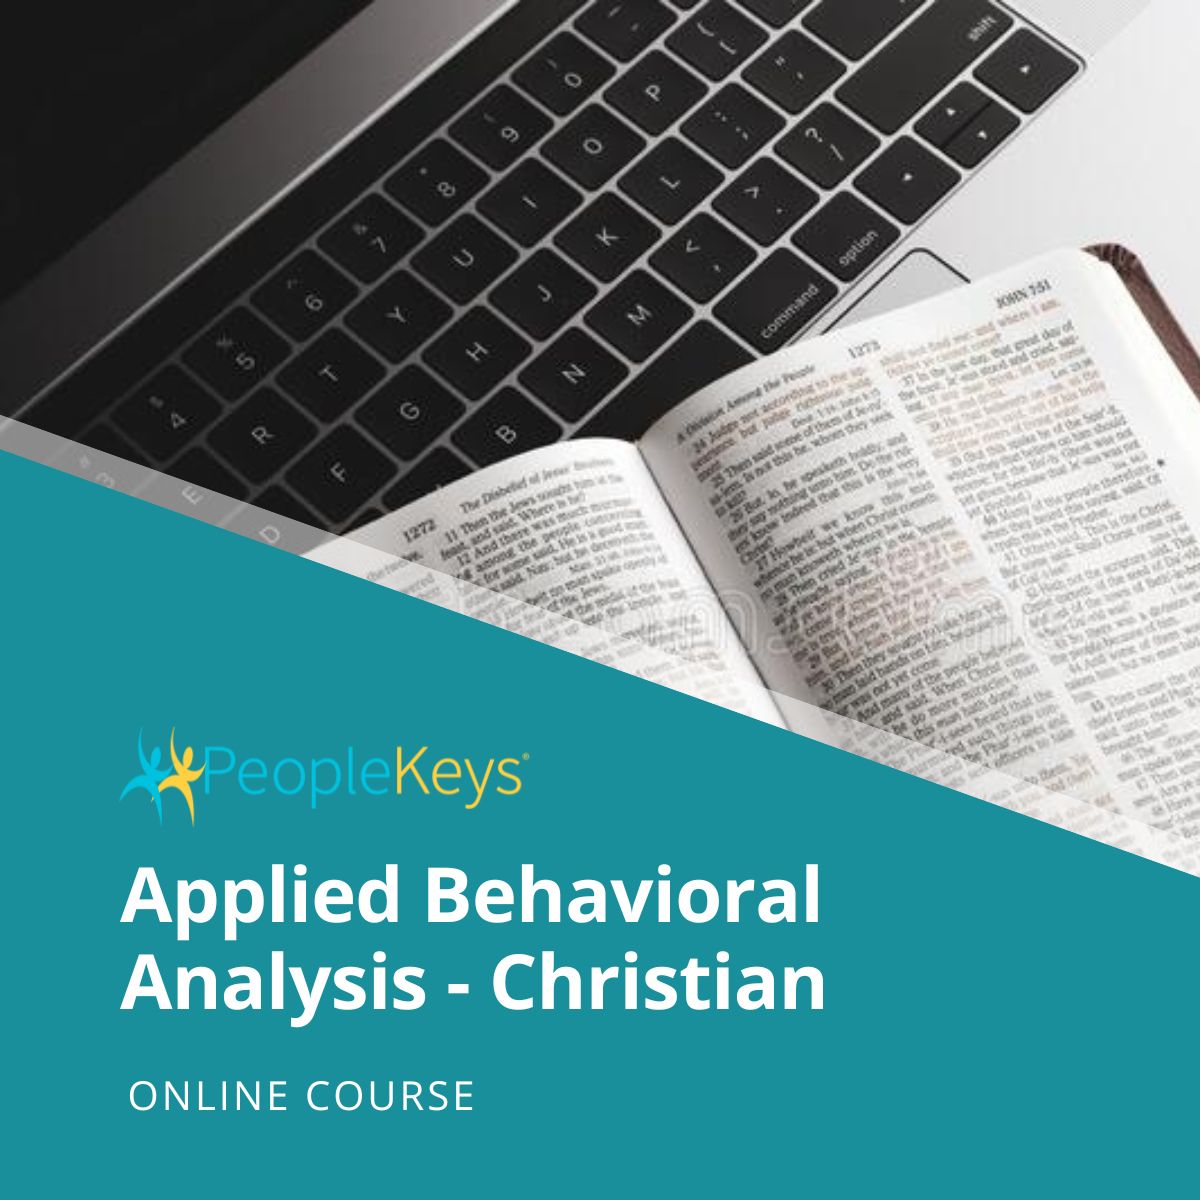 DISC Training Level 2: Applied Behavioral Analysis Course (Online) - Christian